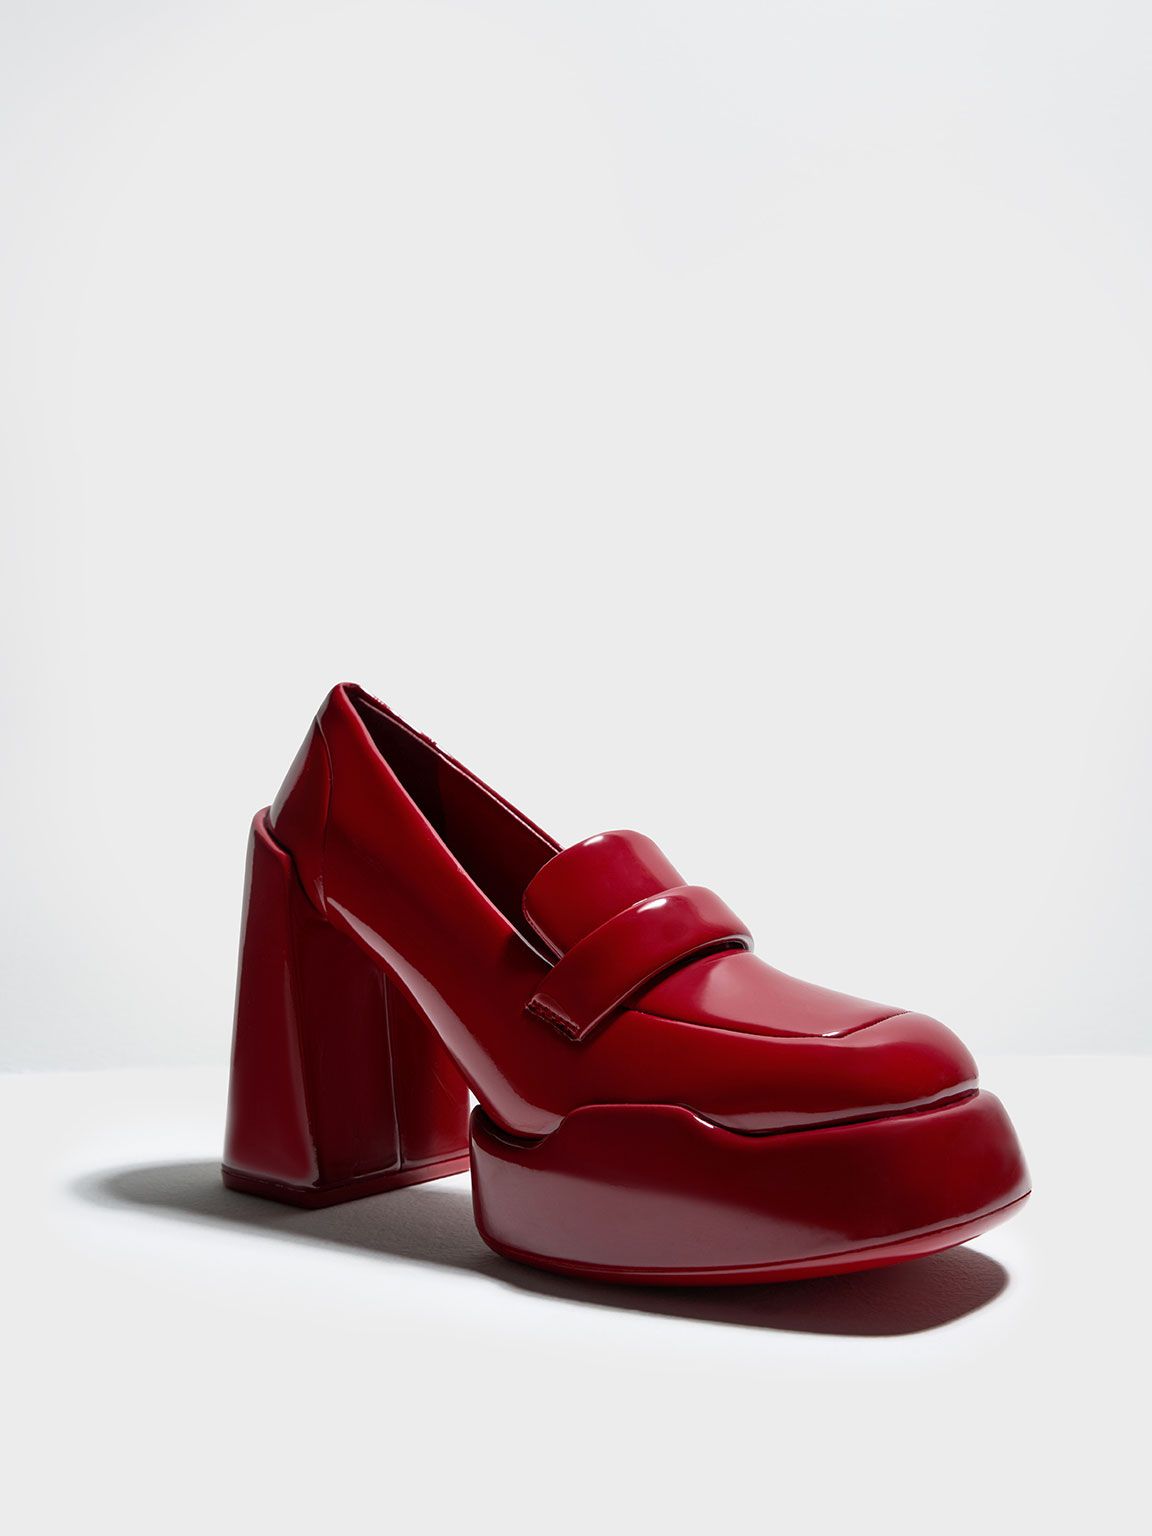 How to Style Red Loafers: Best 13 Sharp & Attractive Outfits for Ladies